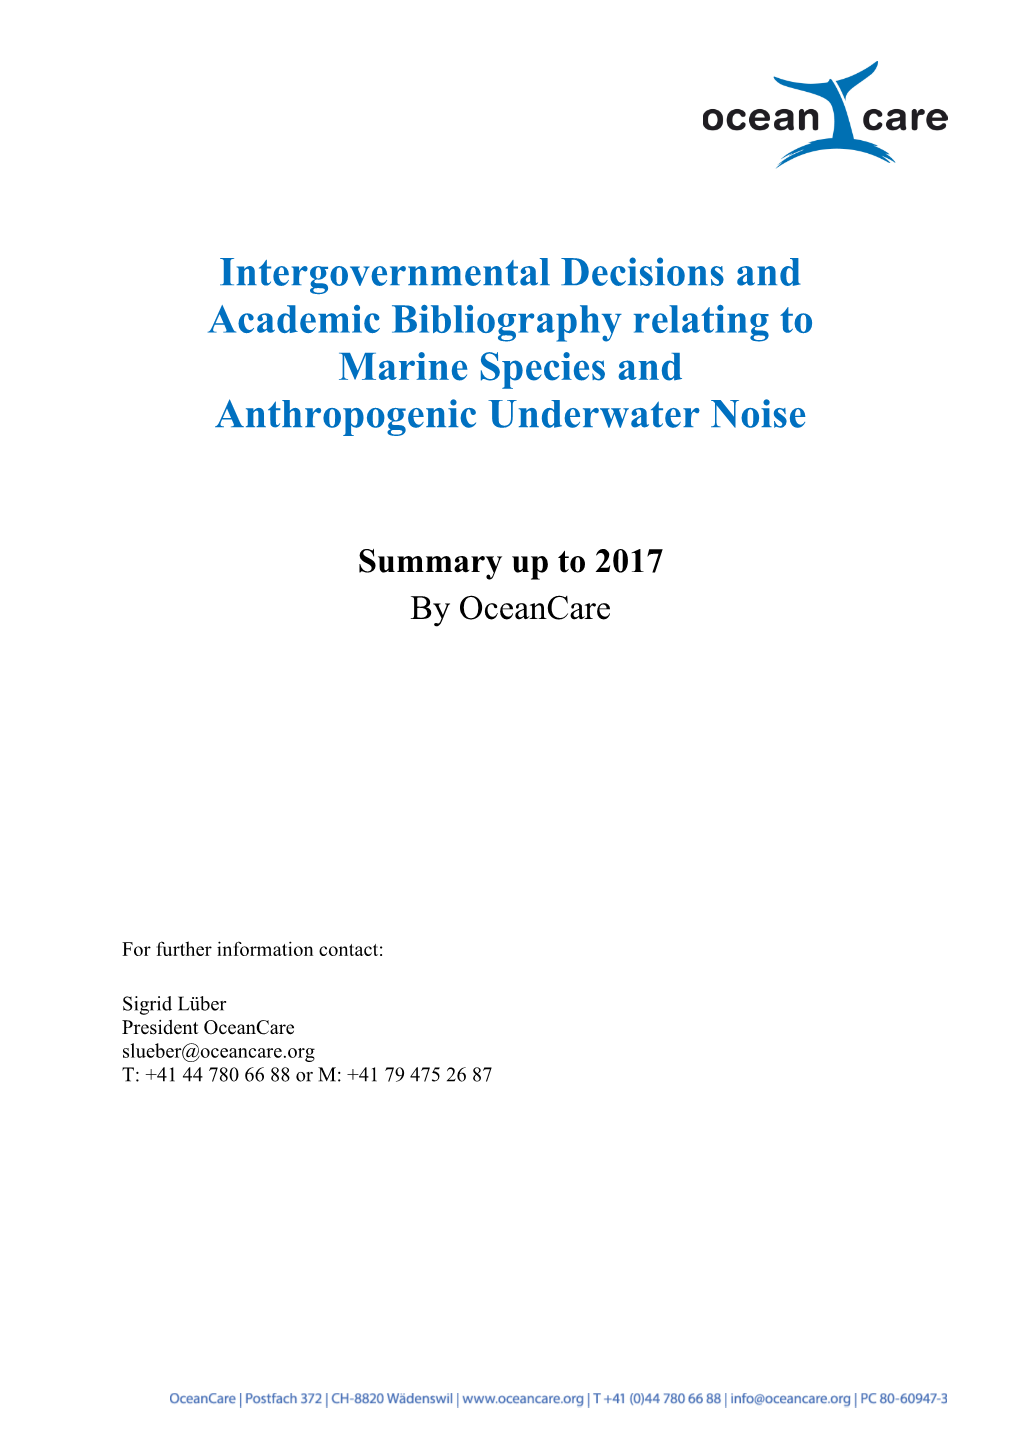 Intergovernmental Decisions and Academic Bibliography Relating to Marine Species and Anthropogenic Underwater Noise